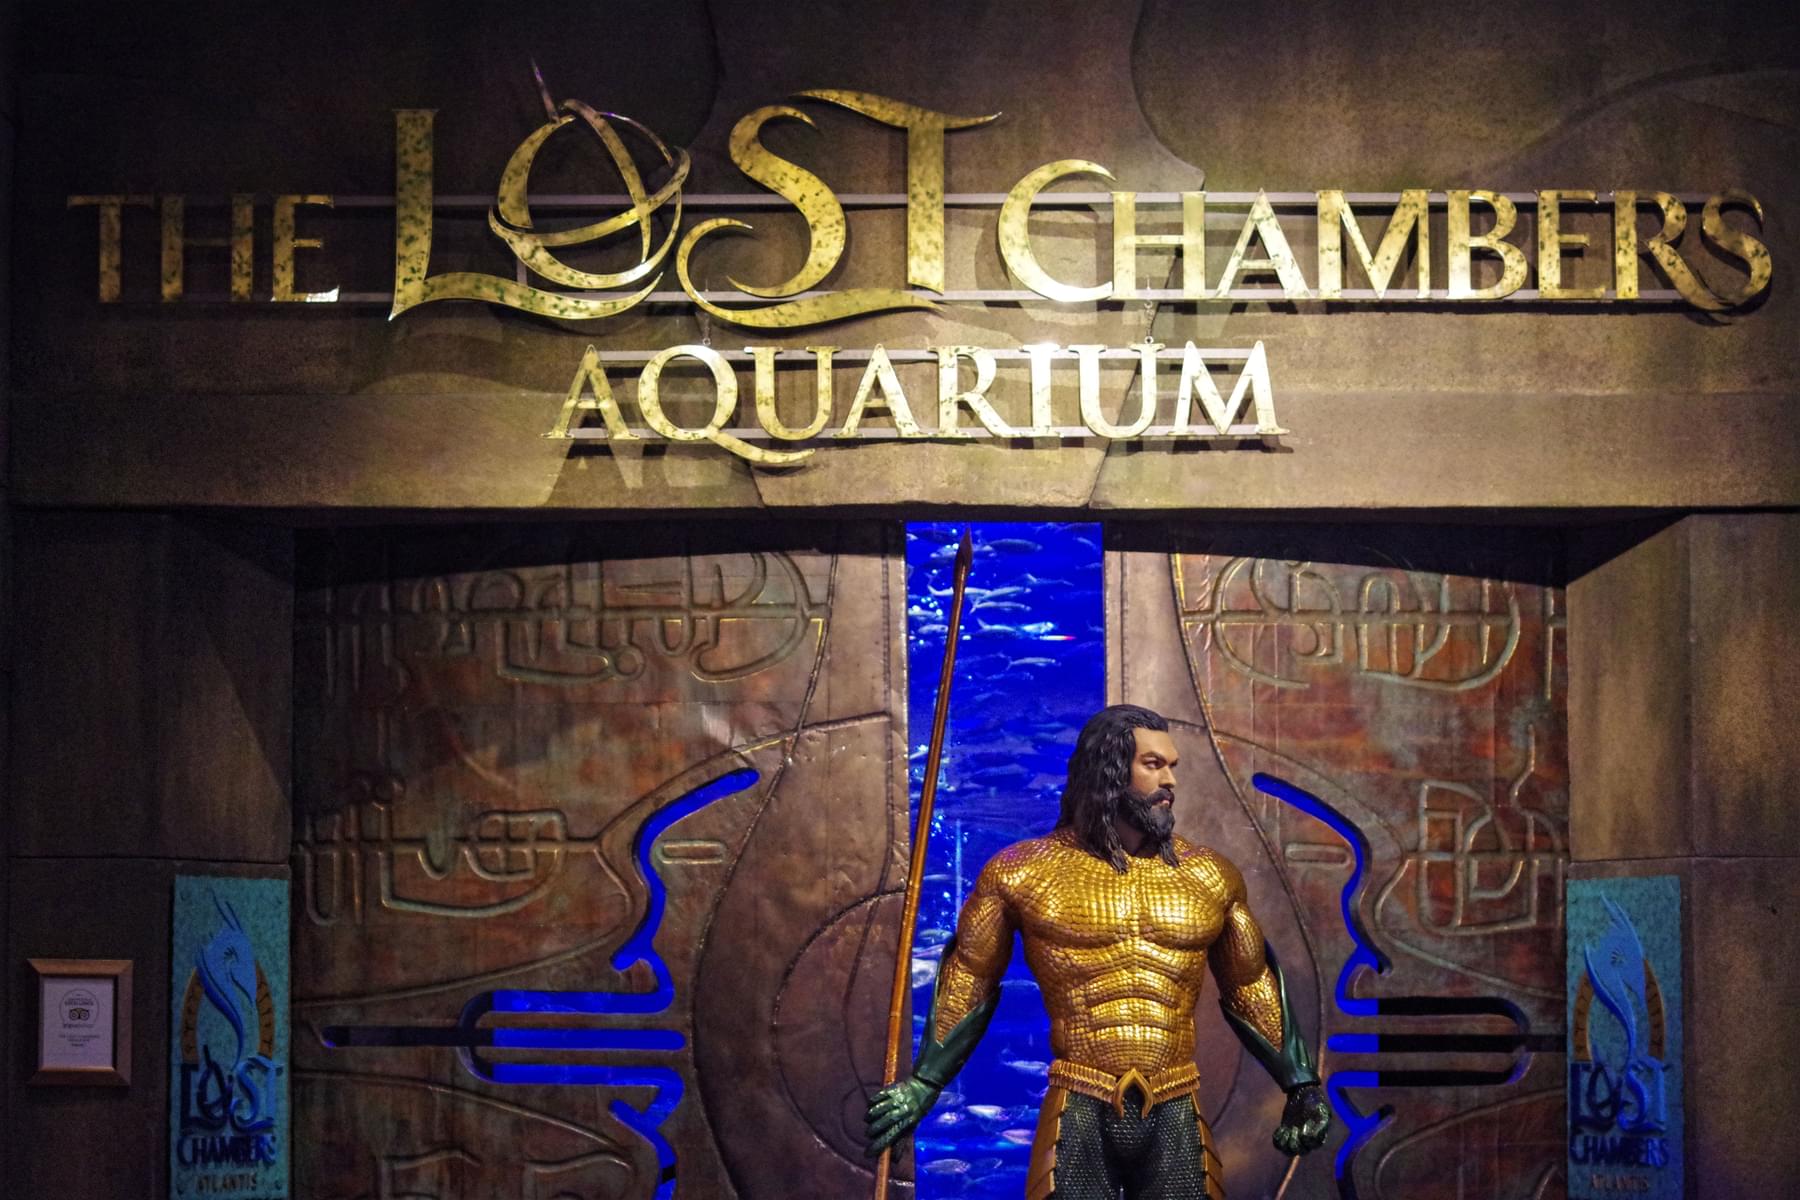 Book The Lost Chambers Aquarium Tickets Online